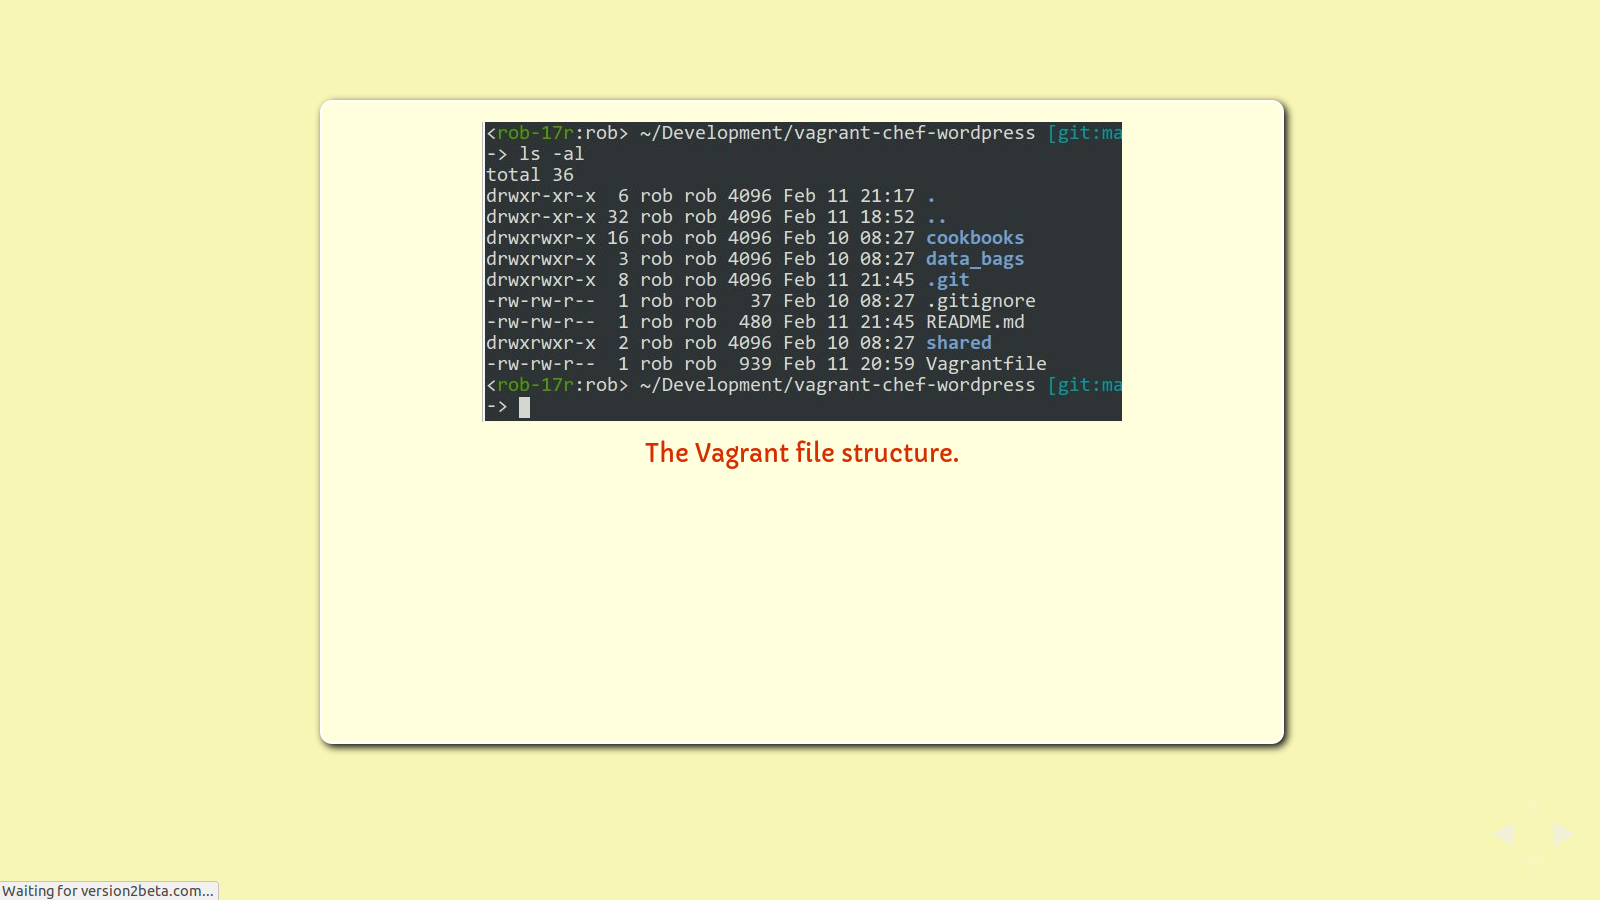 Slide: Vagrant directories from vagrant-chef-wordpress